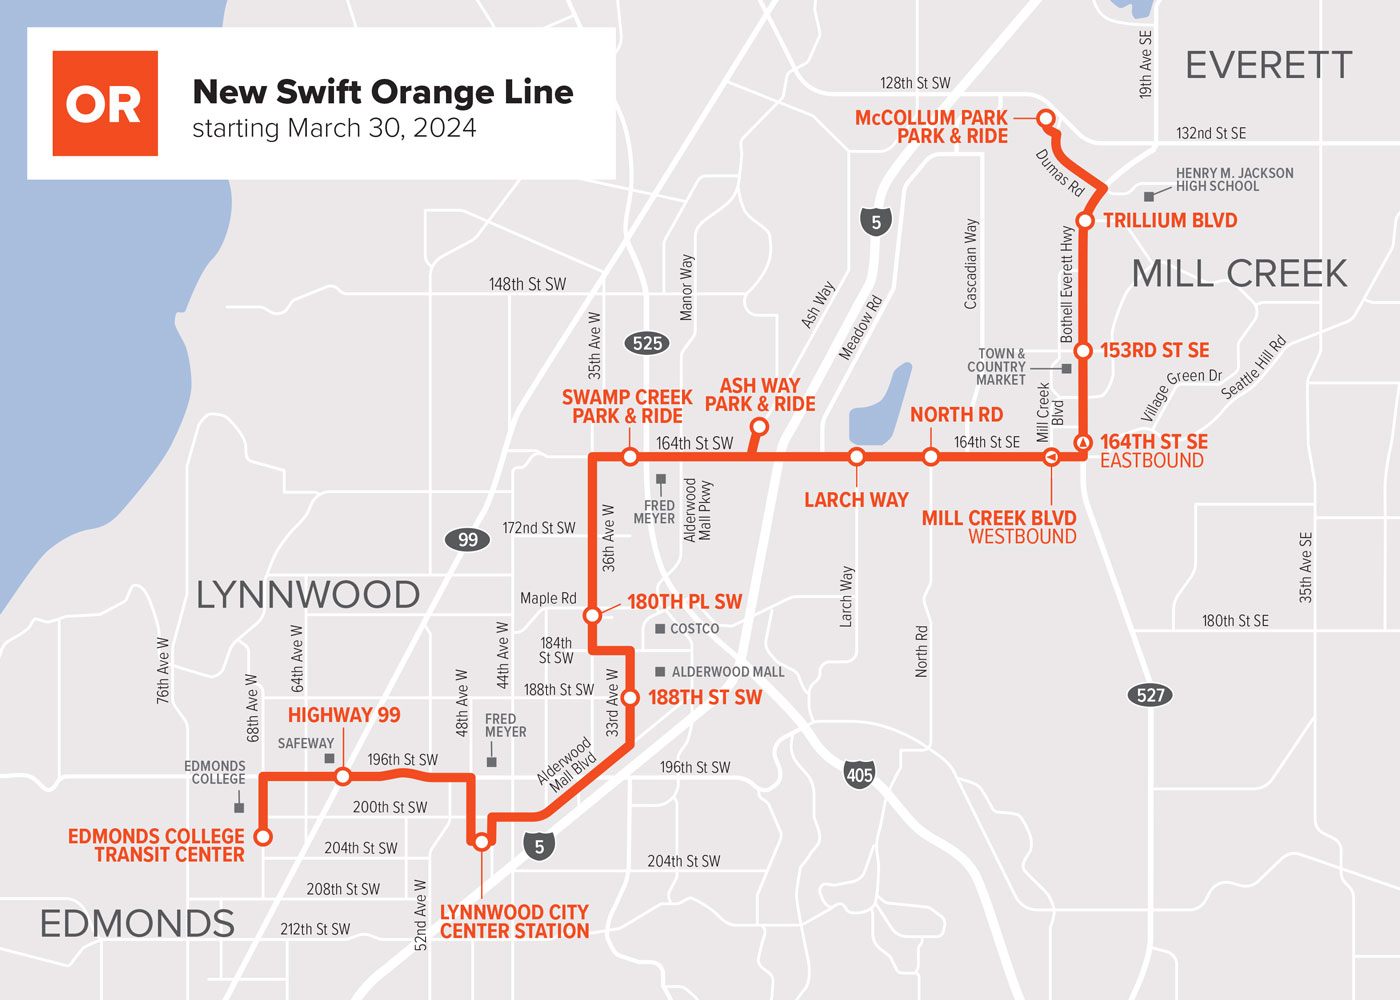 Map of Swift Orange Line serving Edmonds College, Alderwood Mall, and Mill Creek, highlighting connections to Swift Blue and Green lines, with marked stops for Routes 115, 116, 120, and 196. Indicates buses arrive every 10 minutes during peak times for fast and frequent service.